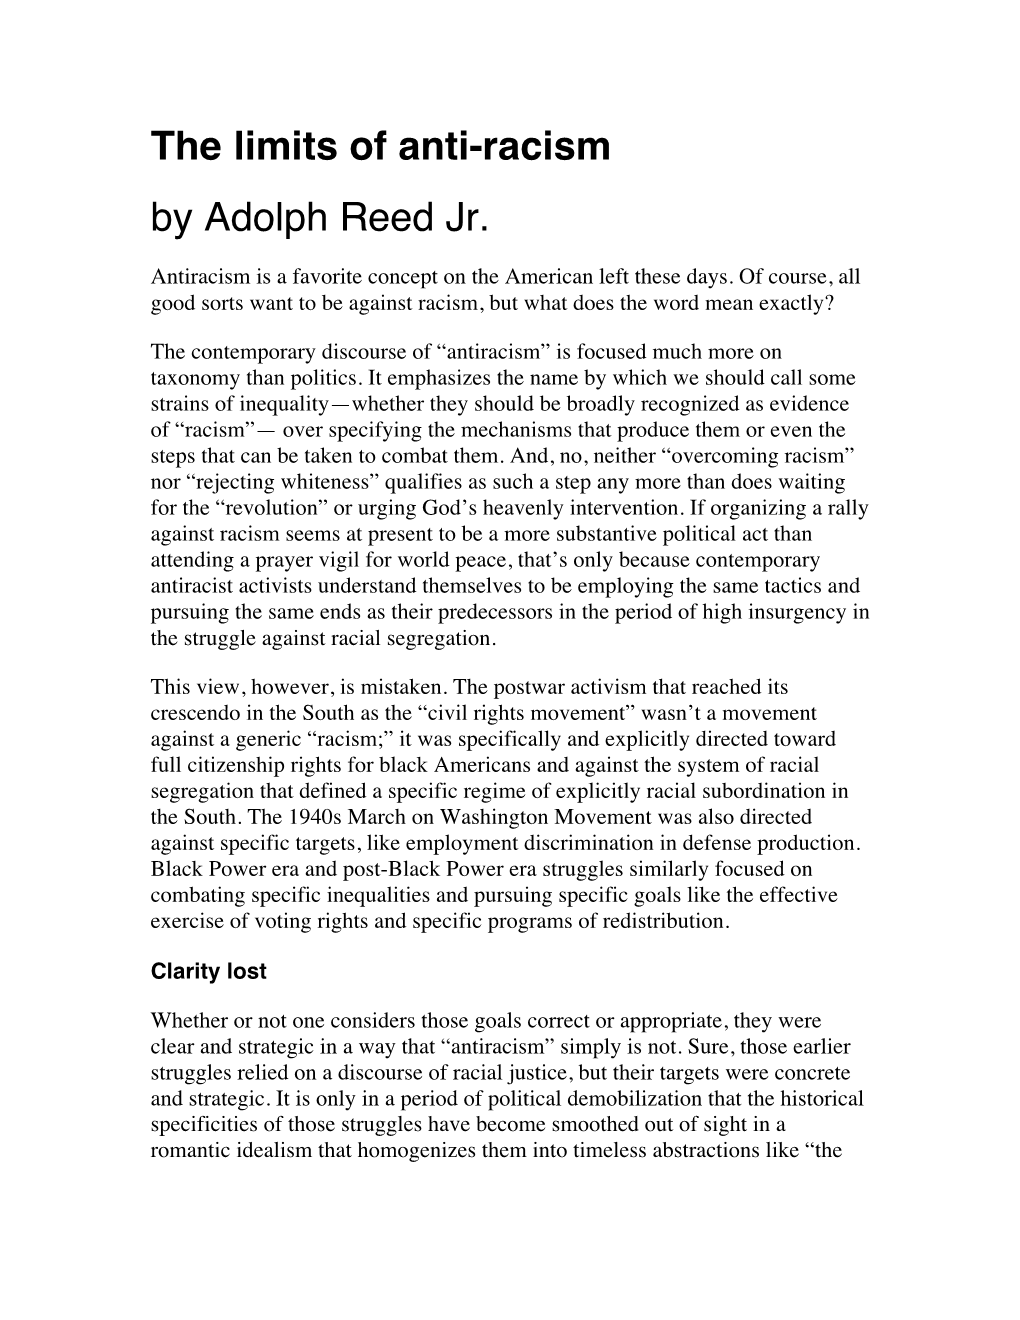 The Limits of Anti-Racism by Adolph Reed Jr